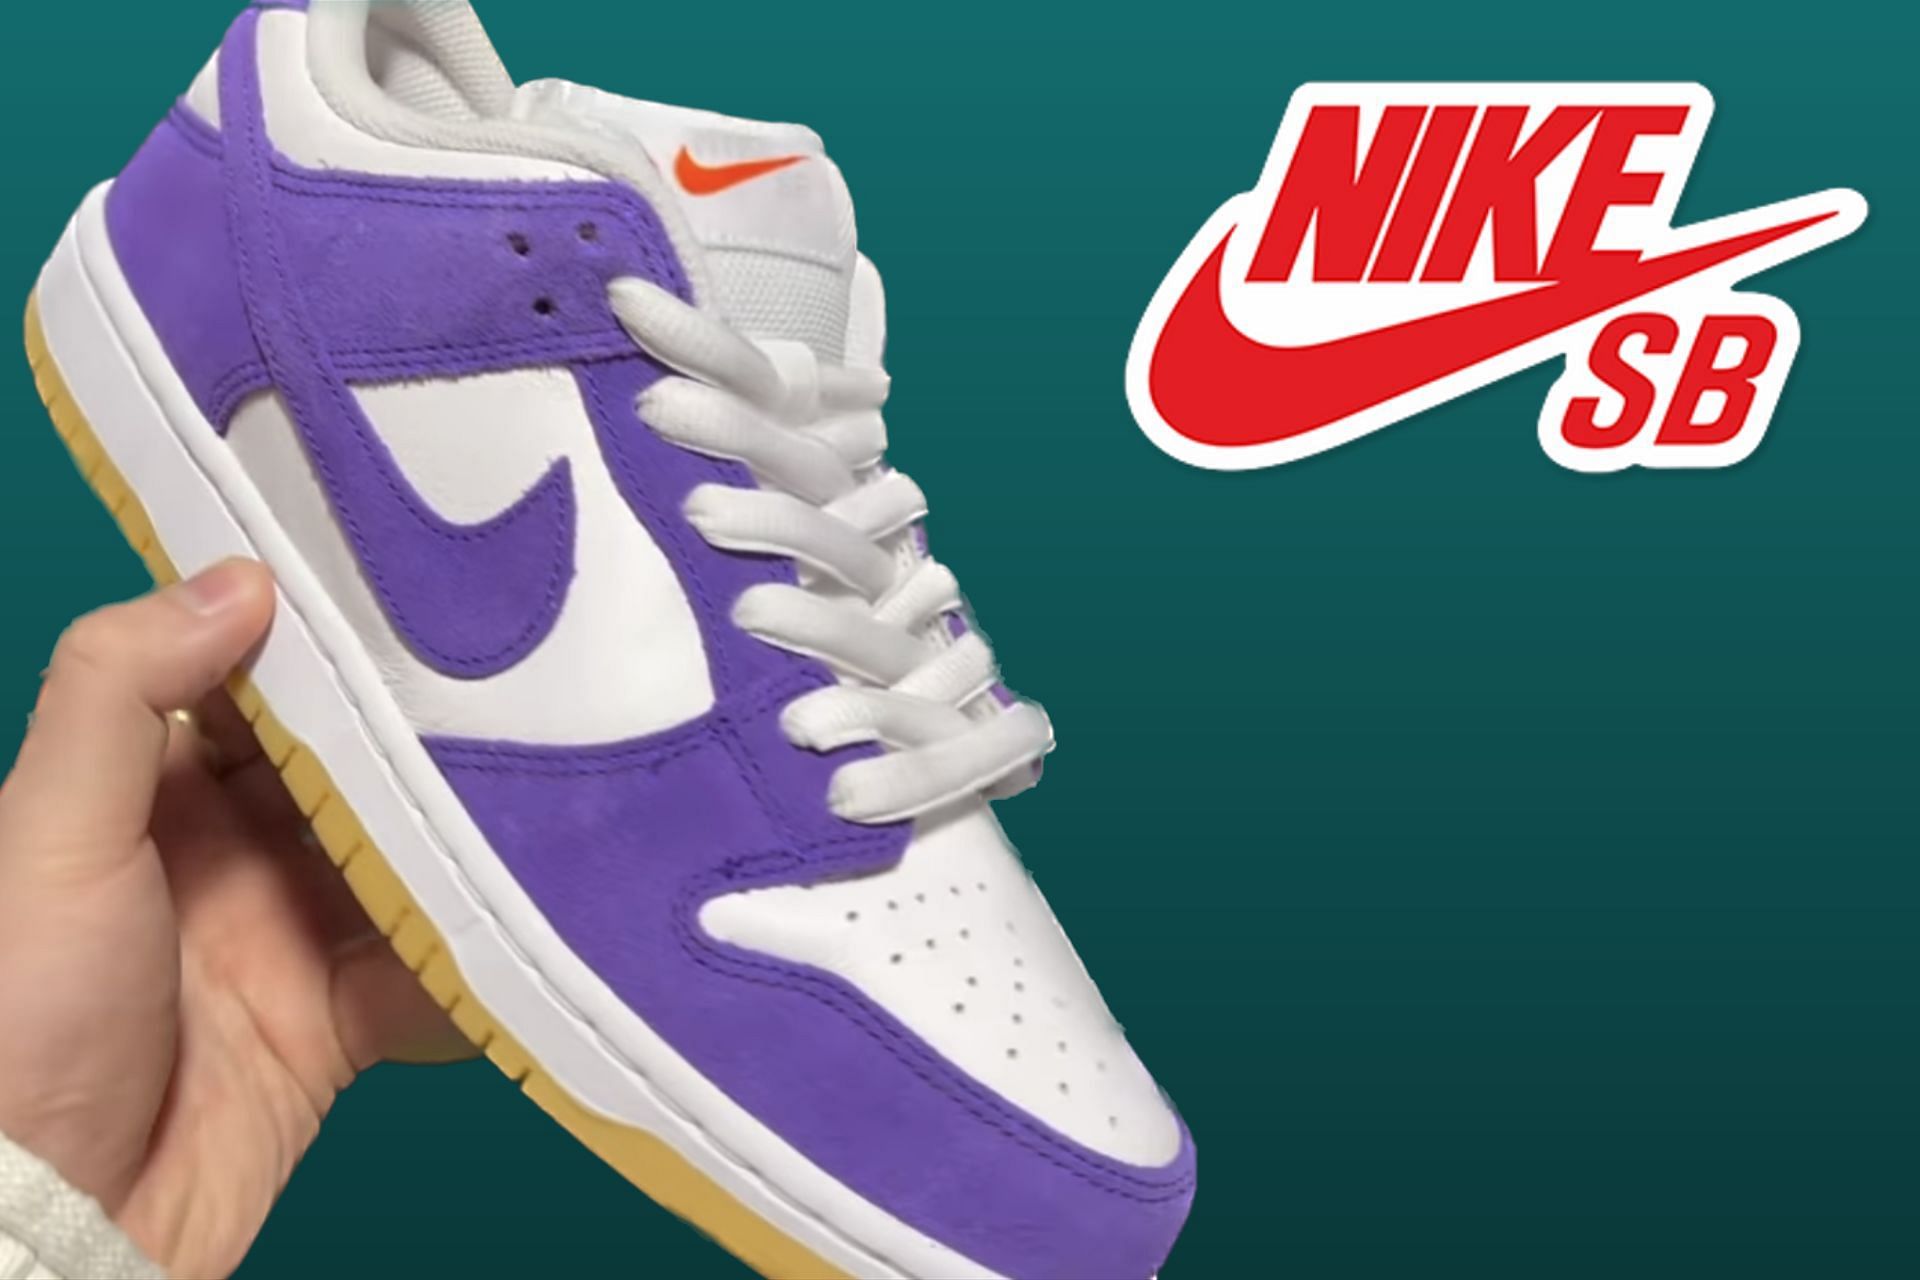 Nike SB Dunk Low “Court Purple Gum” shoes: Where to buy